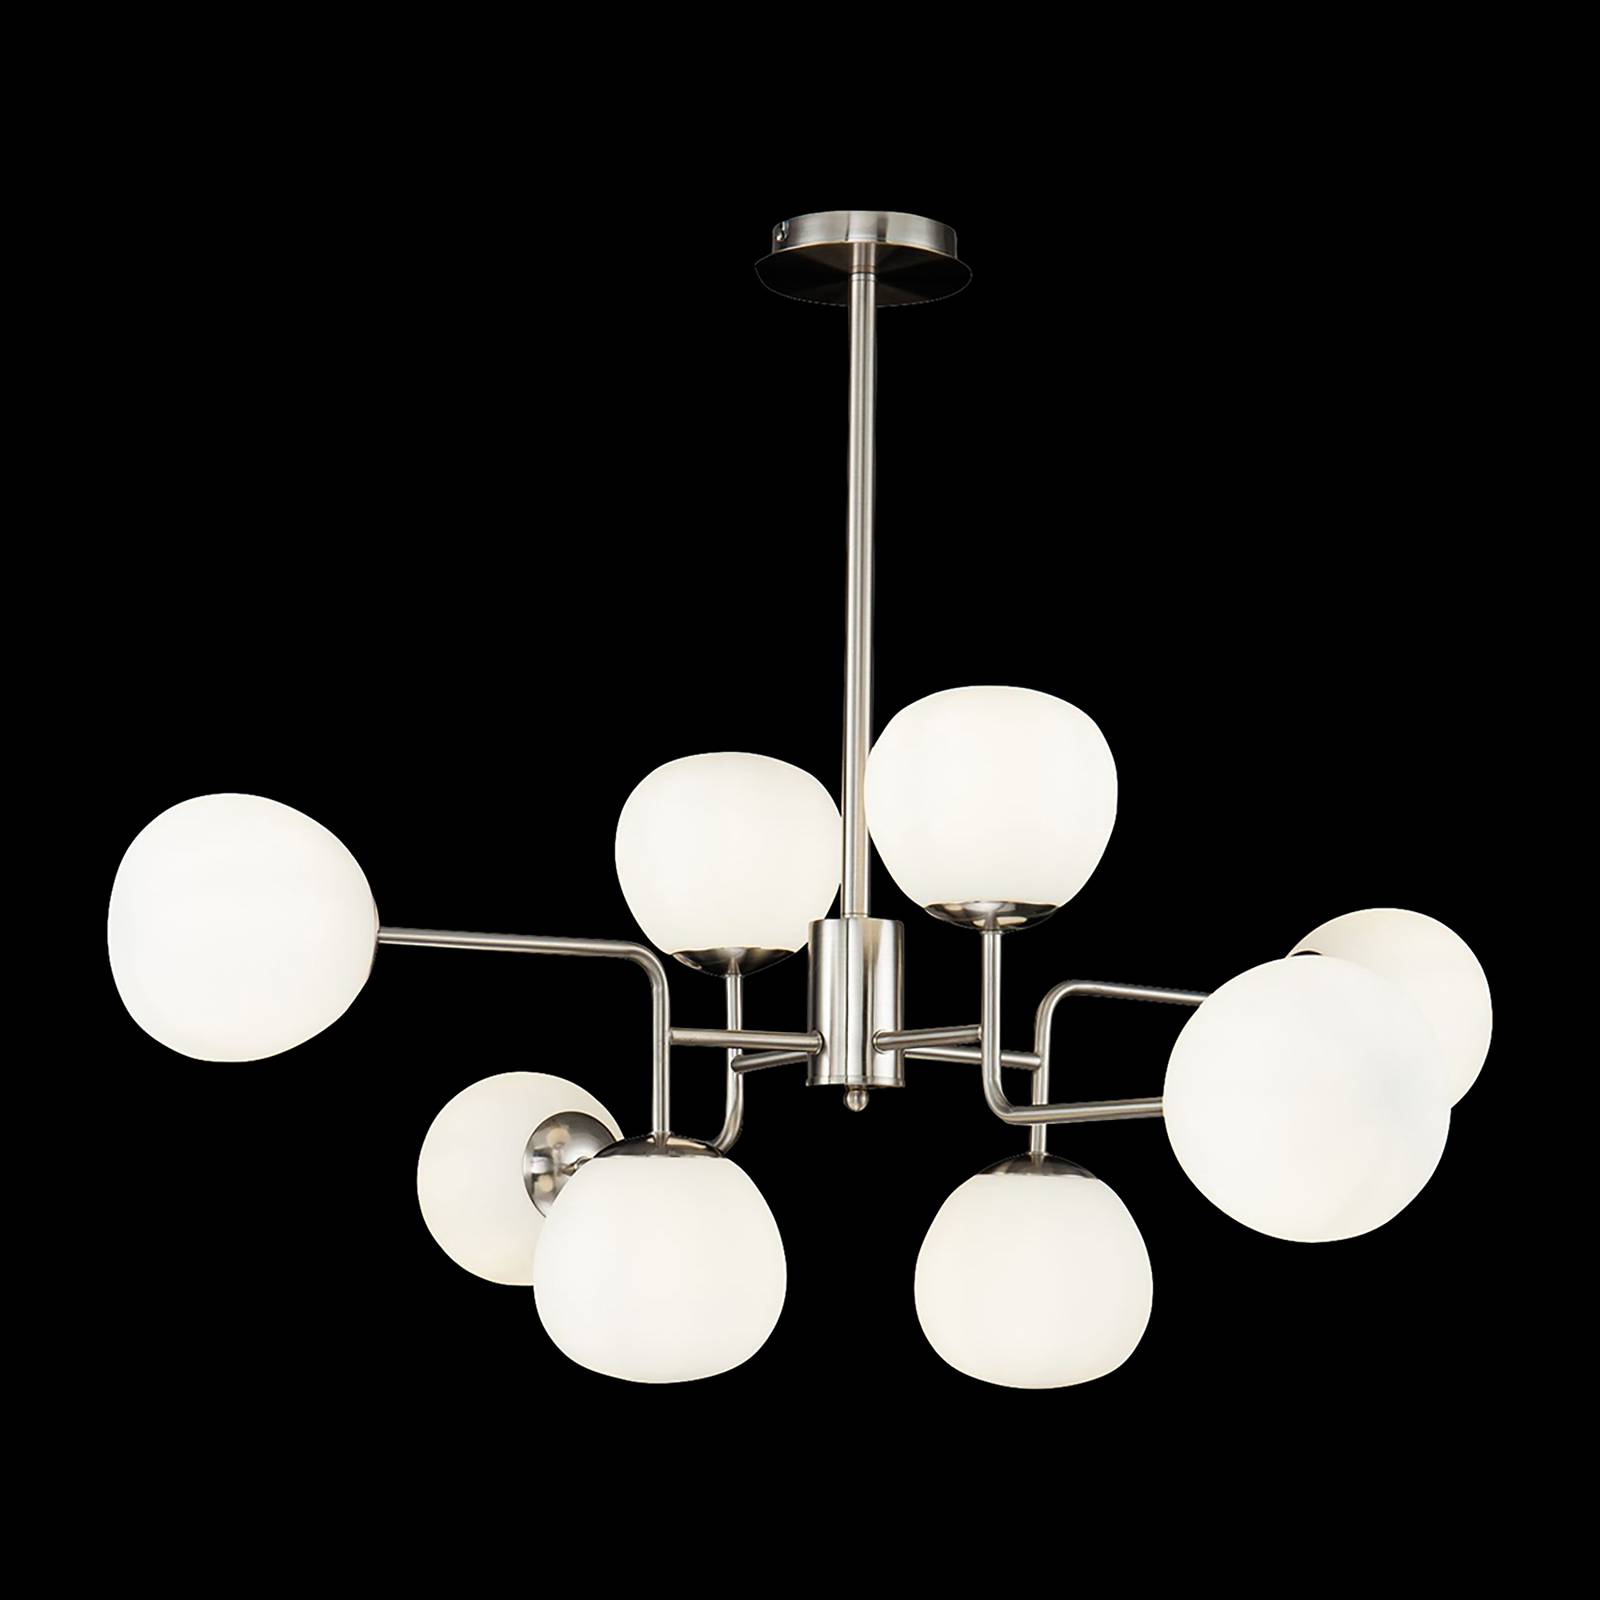 Image of Maytoni Erich suspension à 8 lampes nickel/blanche 4251110037905